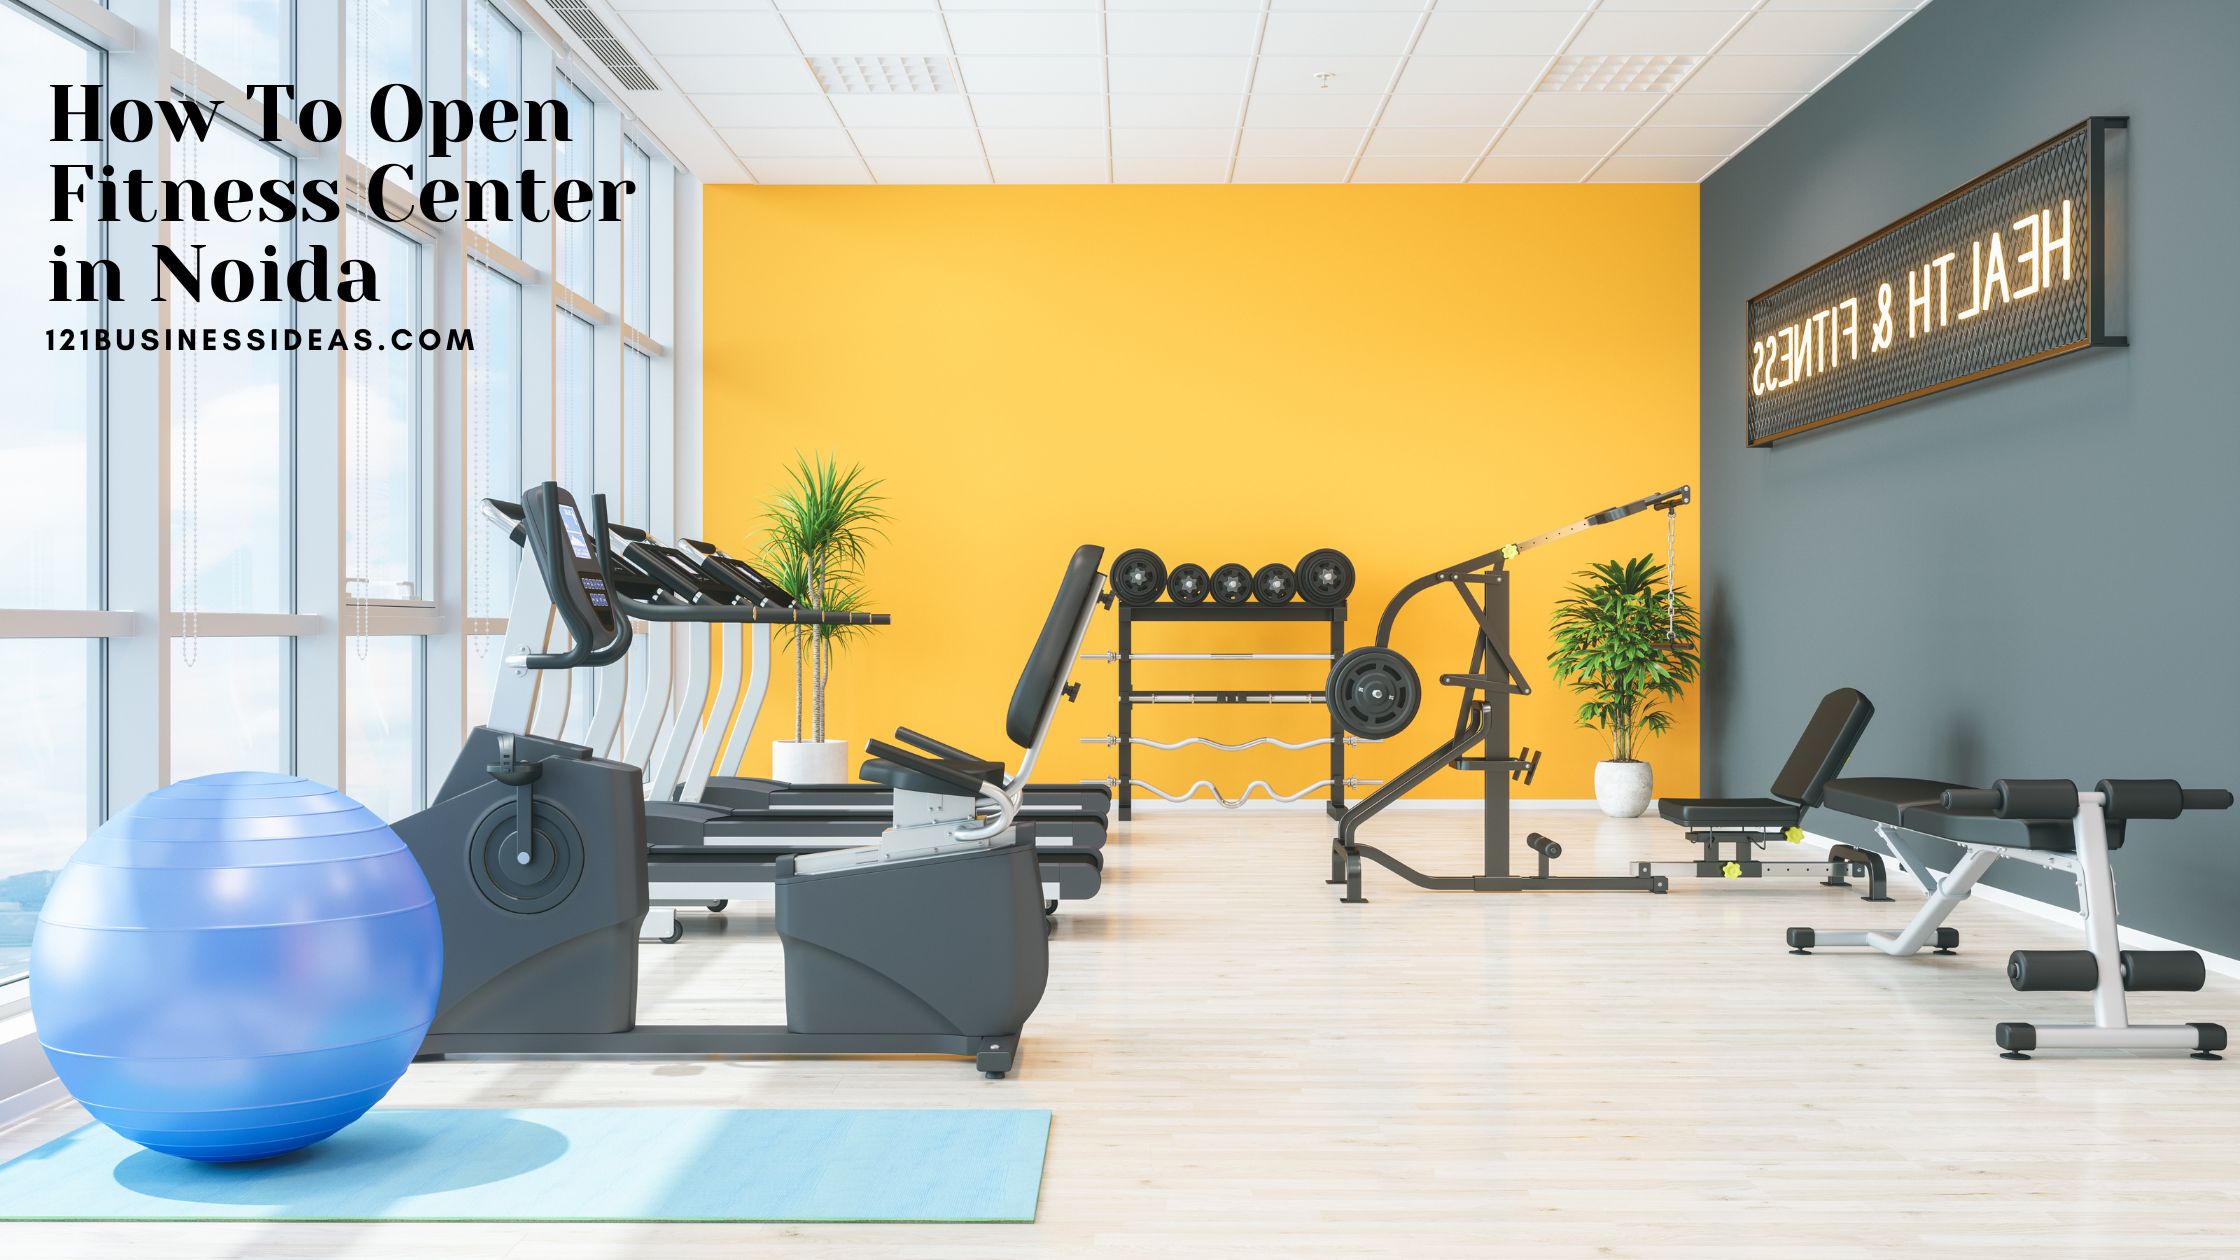 How To Open Fitness Center in Noida